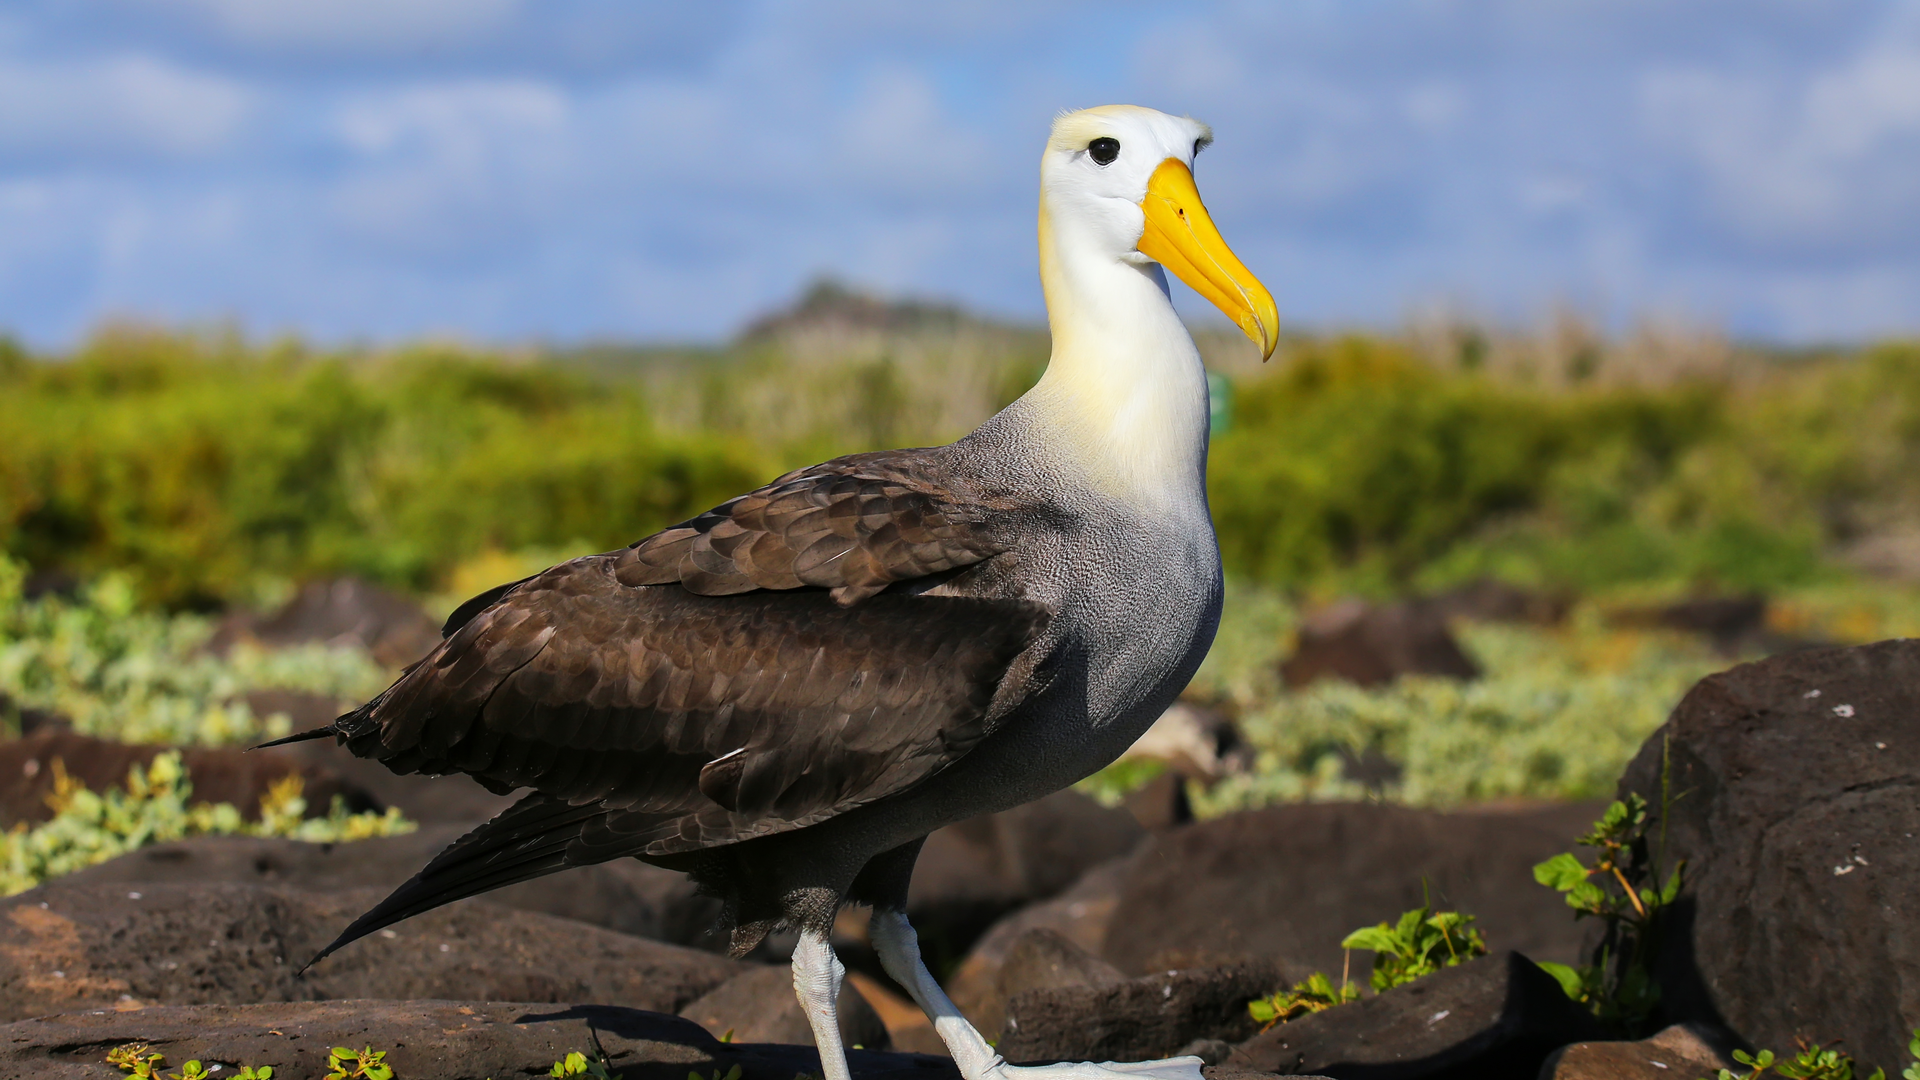 Albatrosses are being recruited to patrol the ocean - Hitecher